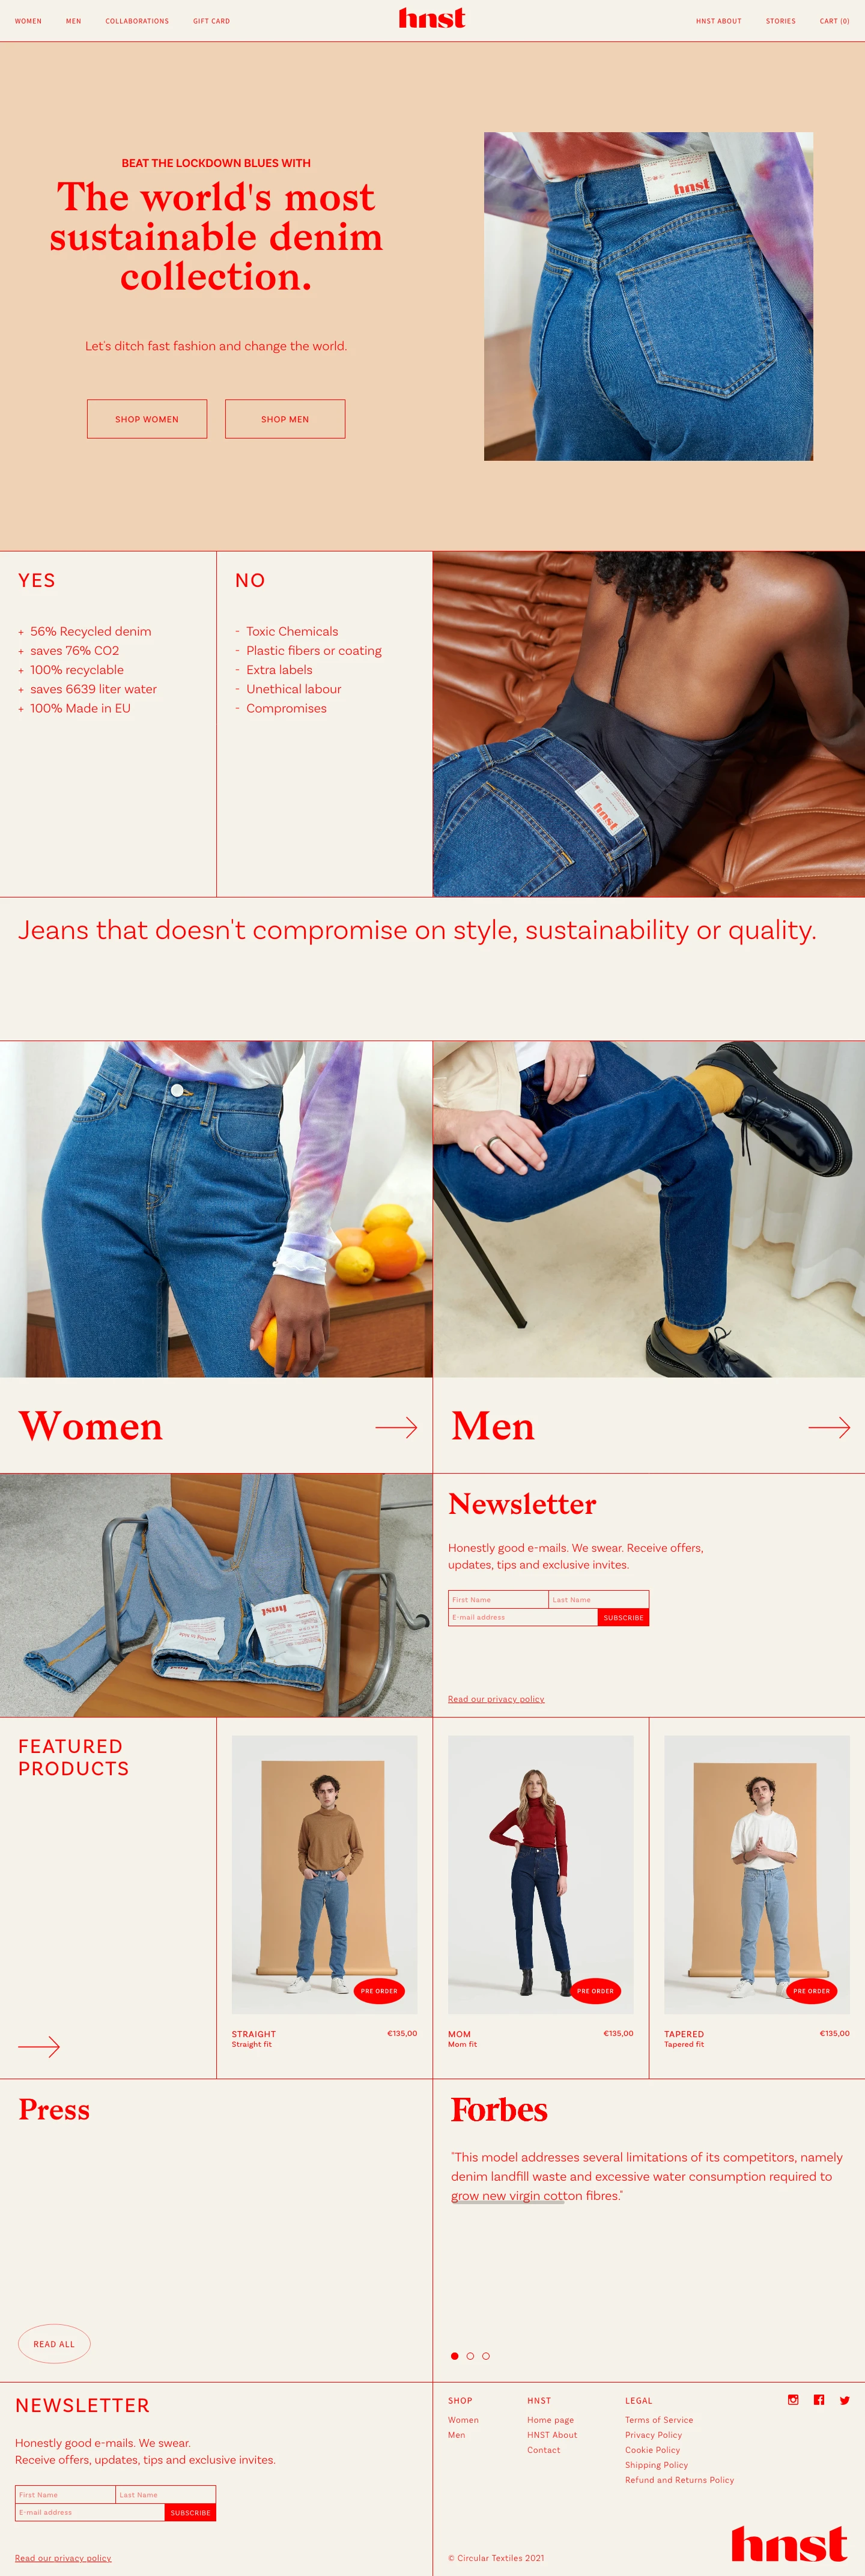 HNST Jeans Landing Page Example: Jeans that doesn't compromise on style, sustainability and quality.